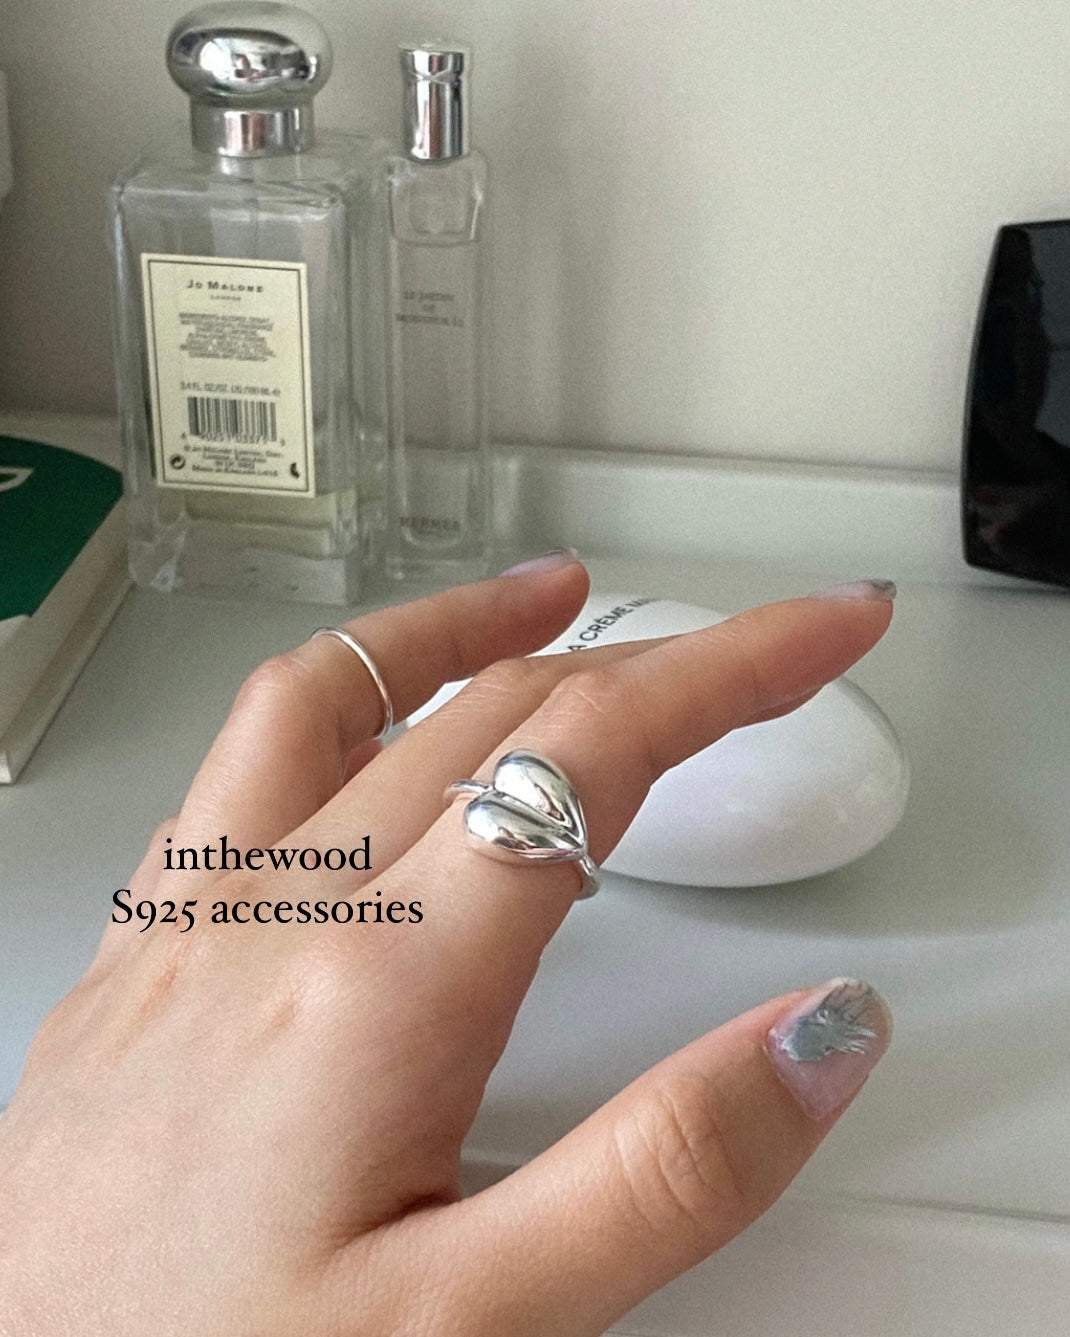 [925silver] Plump Heart Ring